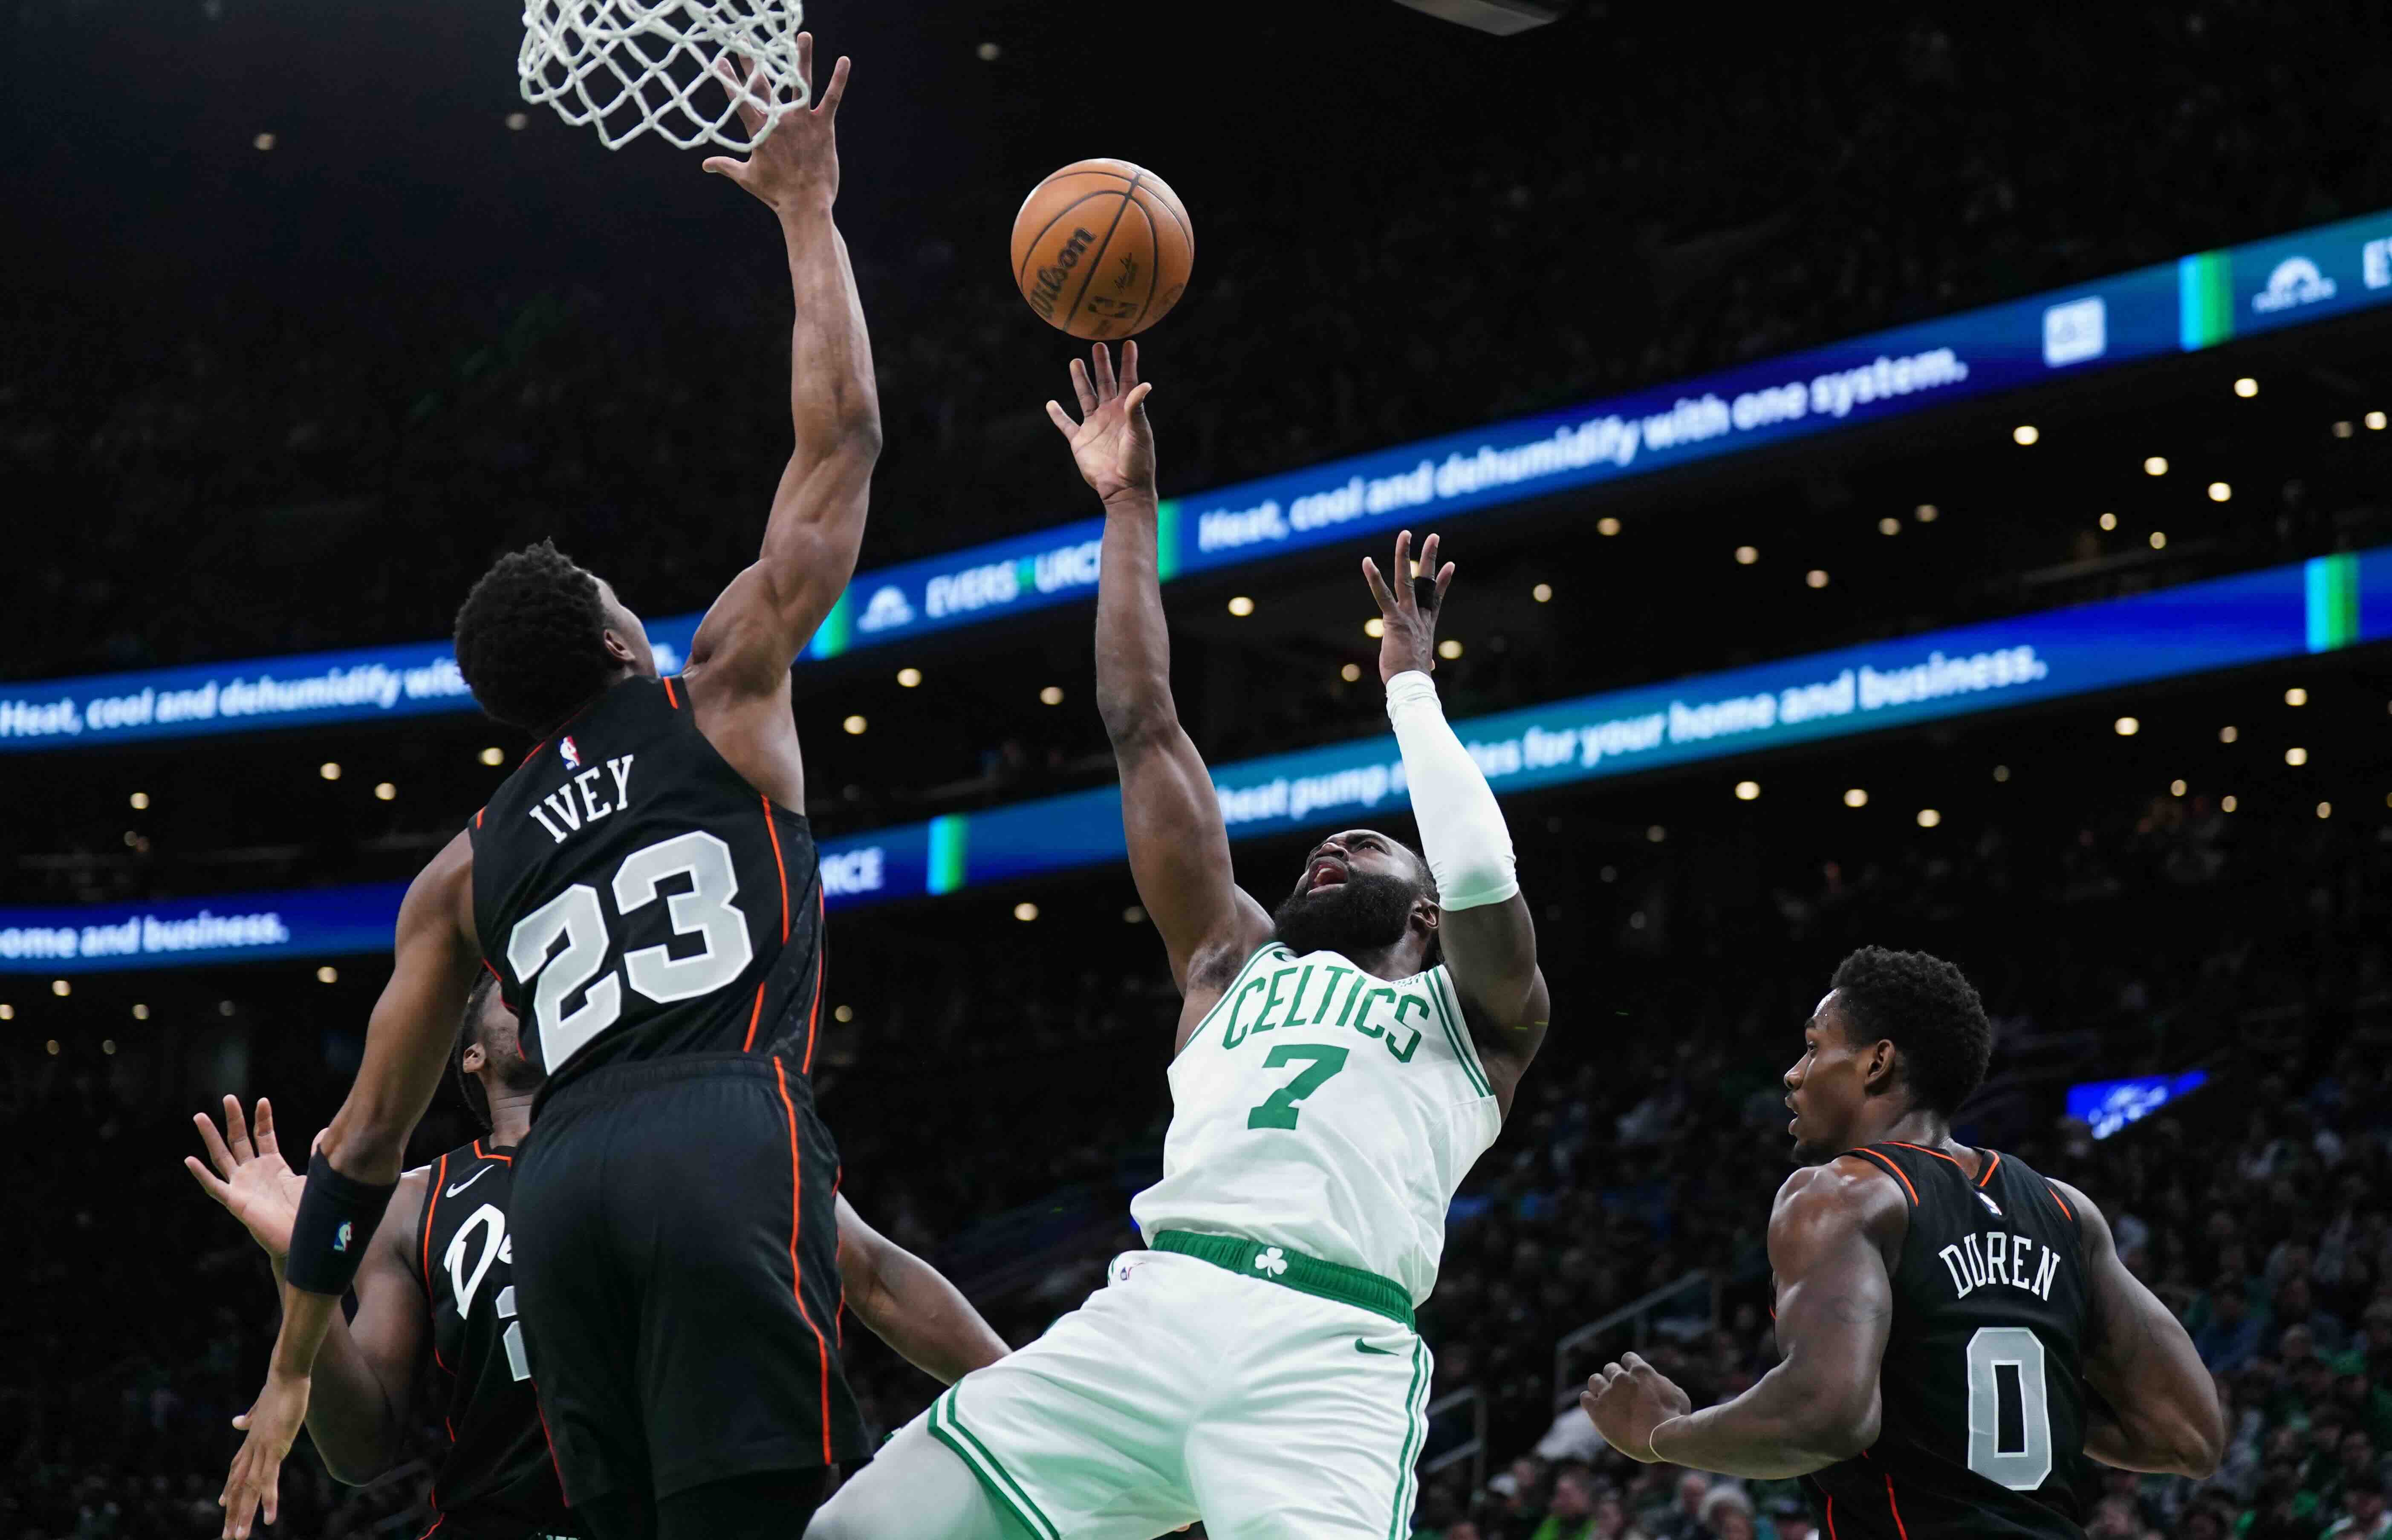 NBA: Celtics roll past Pistons for 8th consecutive win